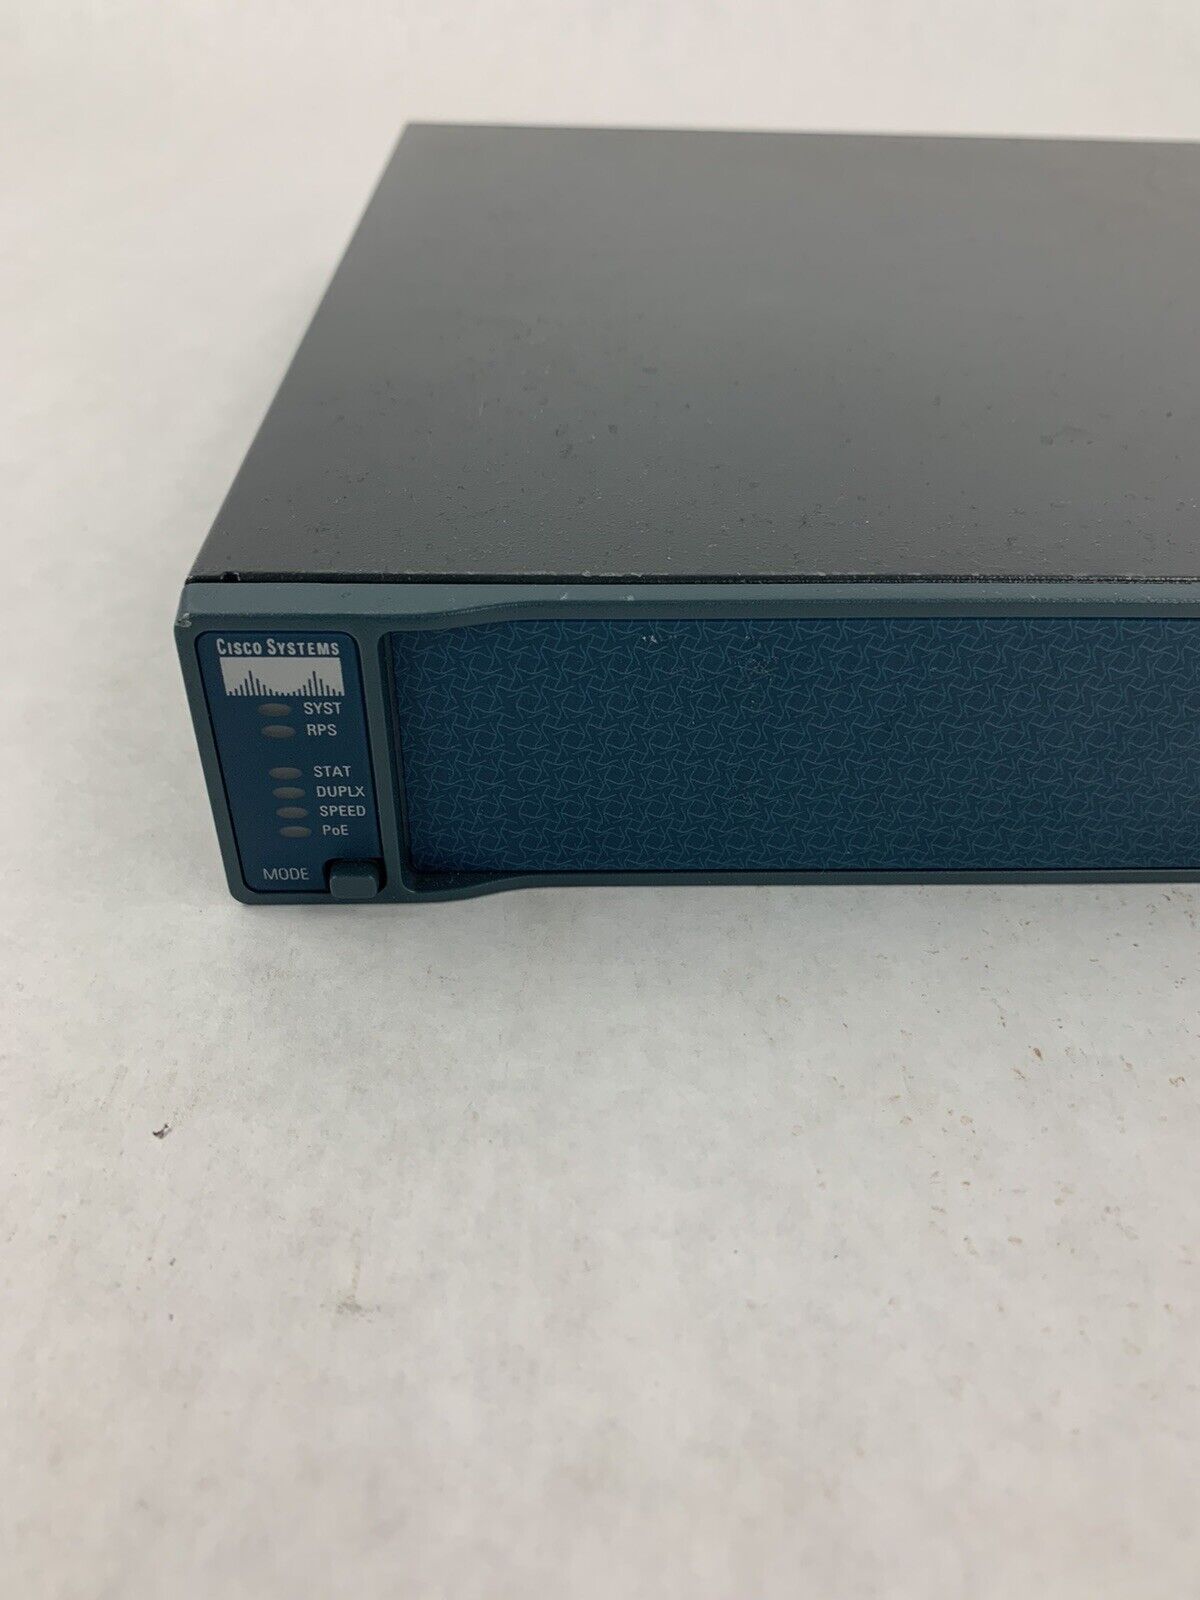 Cisco 3560 Series WS-C3560-24PS-S Network Managed Switch